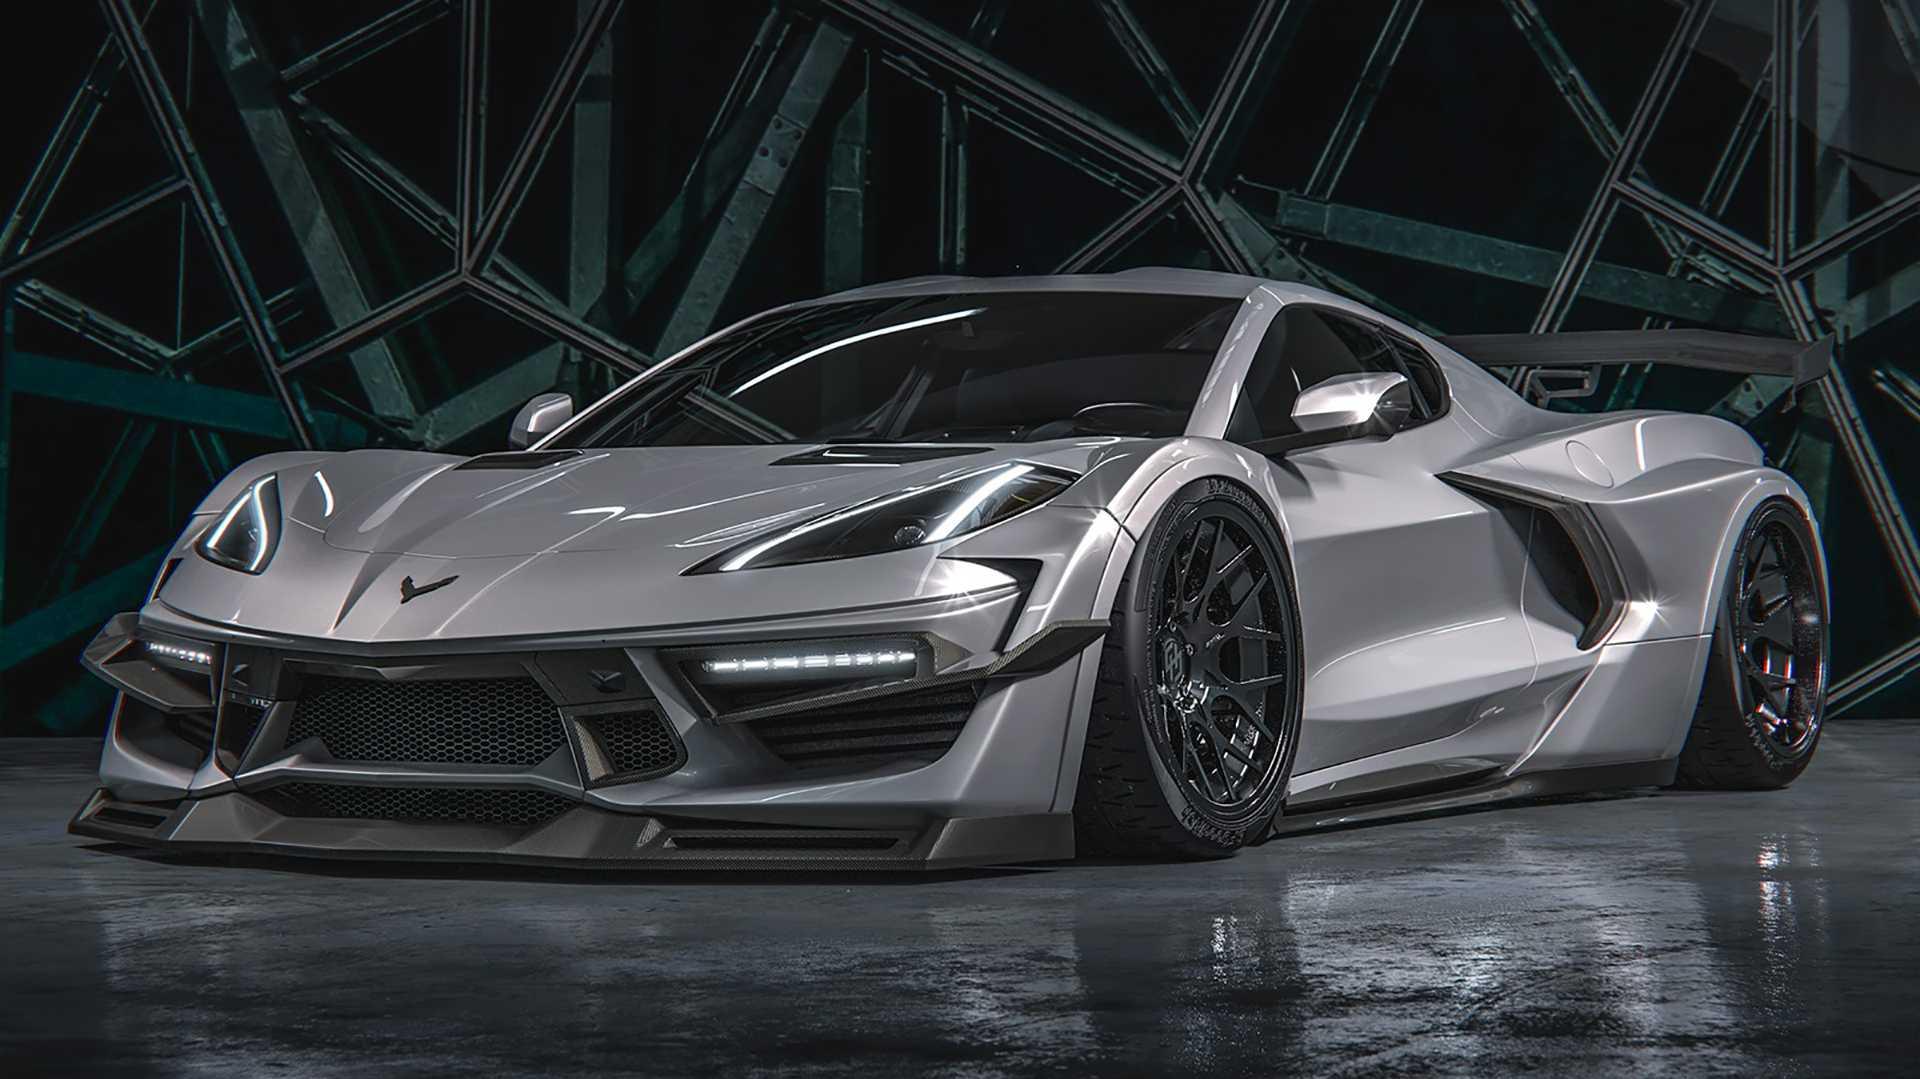 Chevy Corvette Widebody Rendering Looks Seriously Sinister